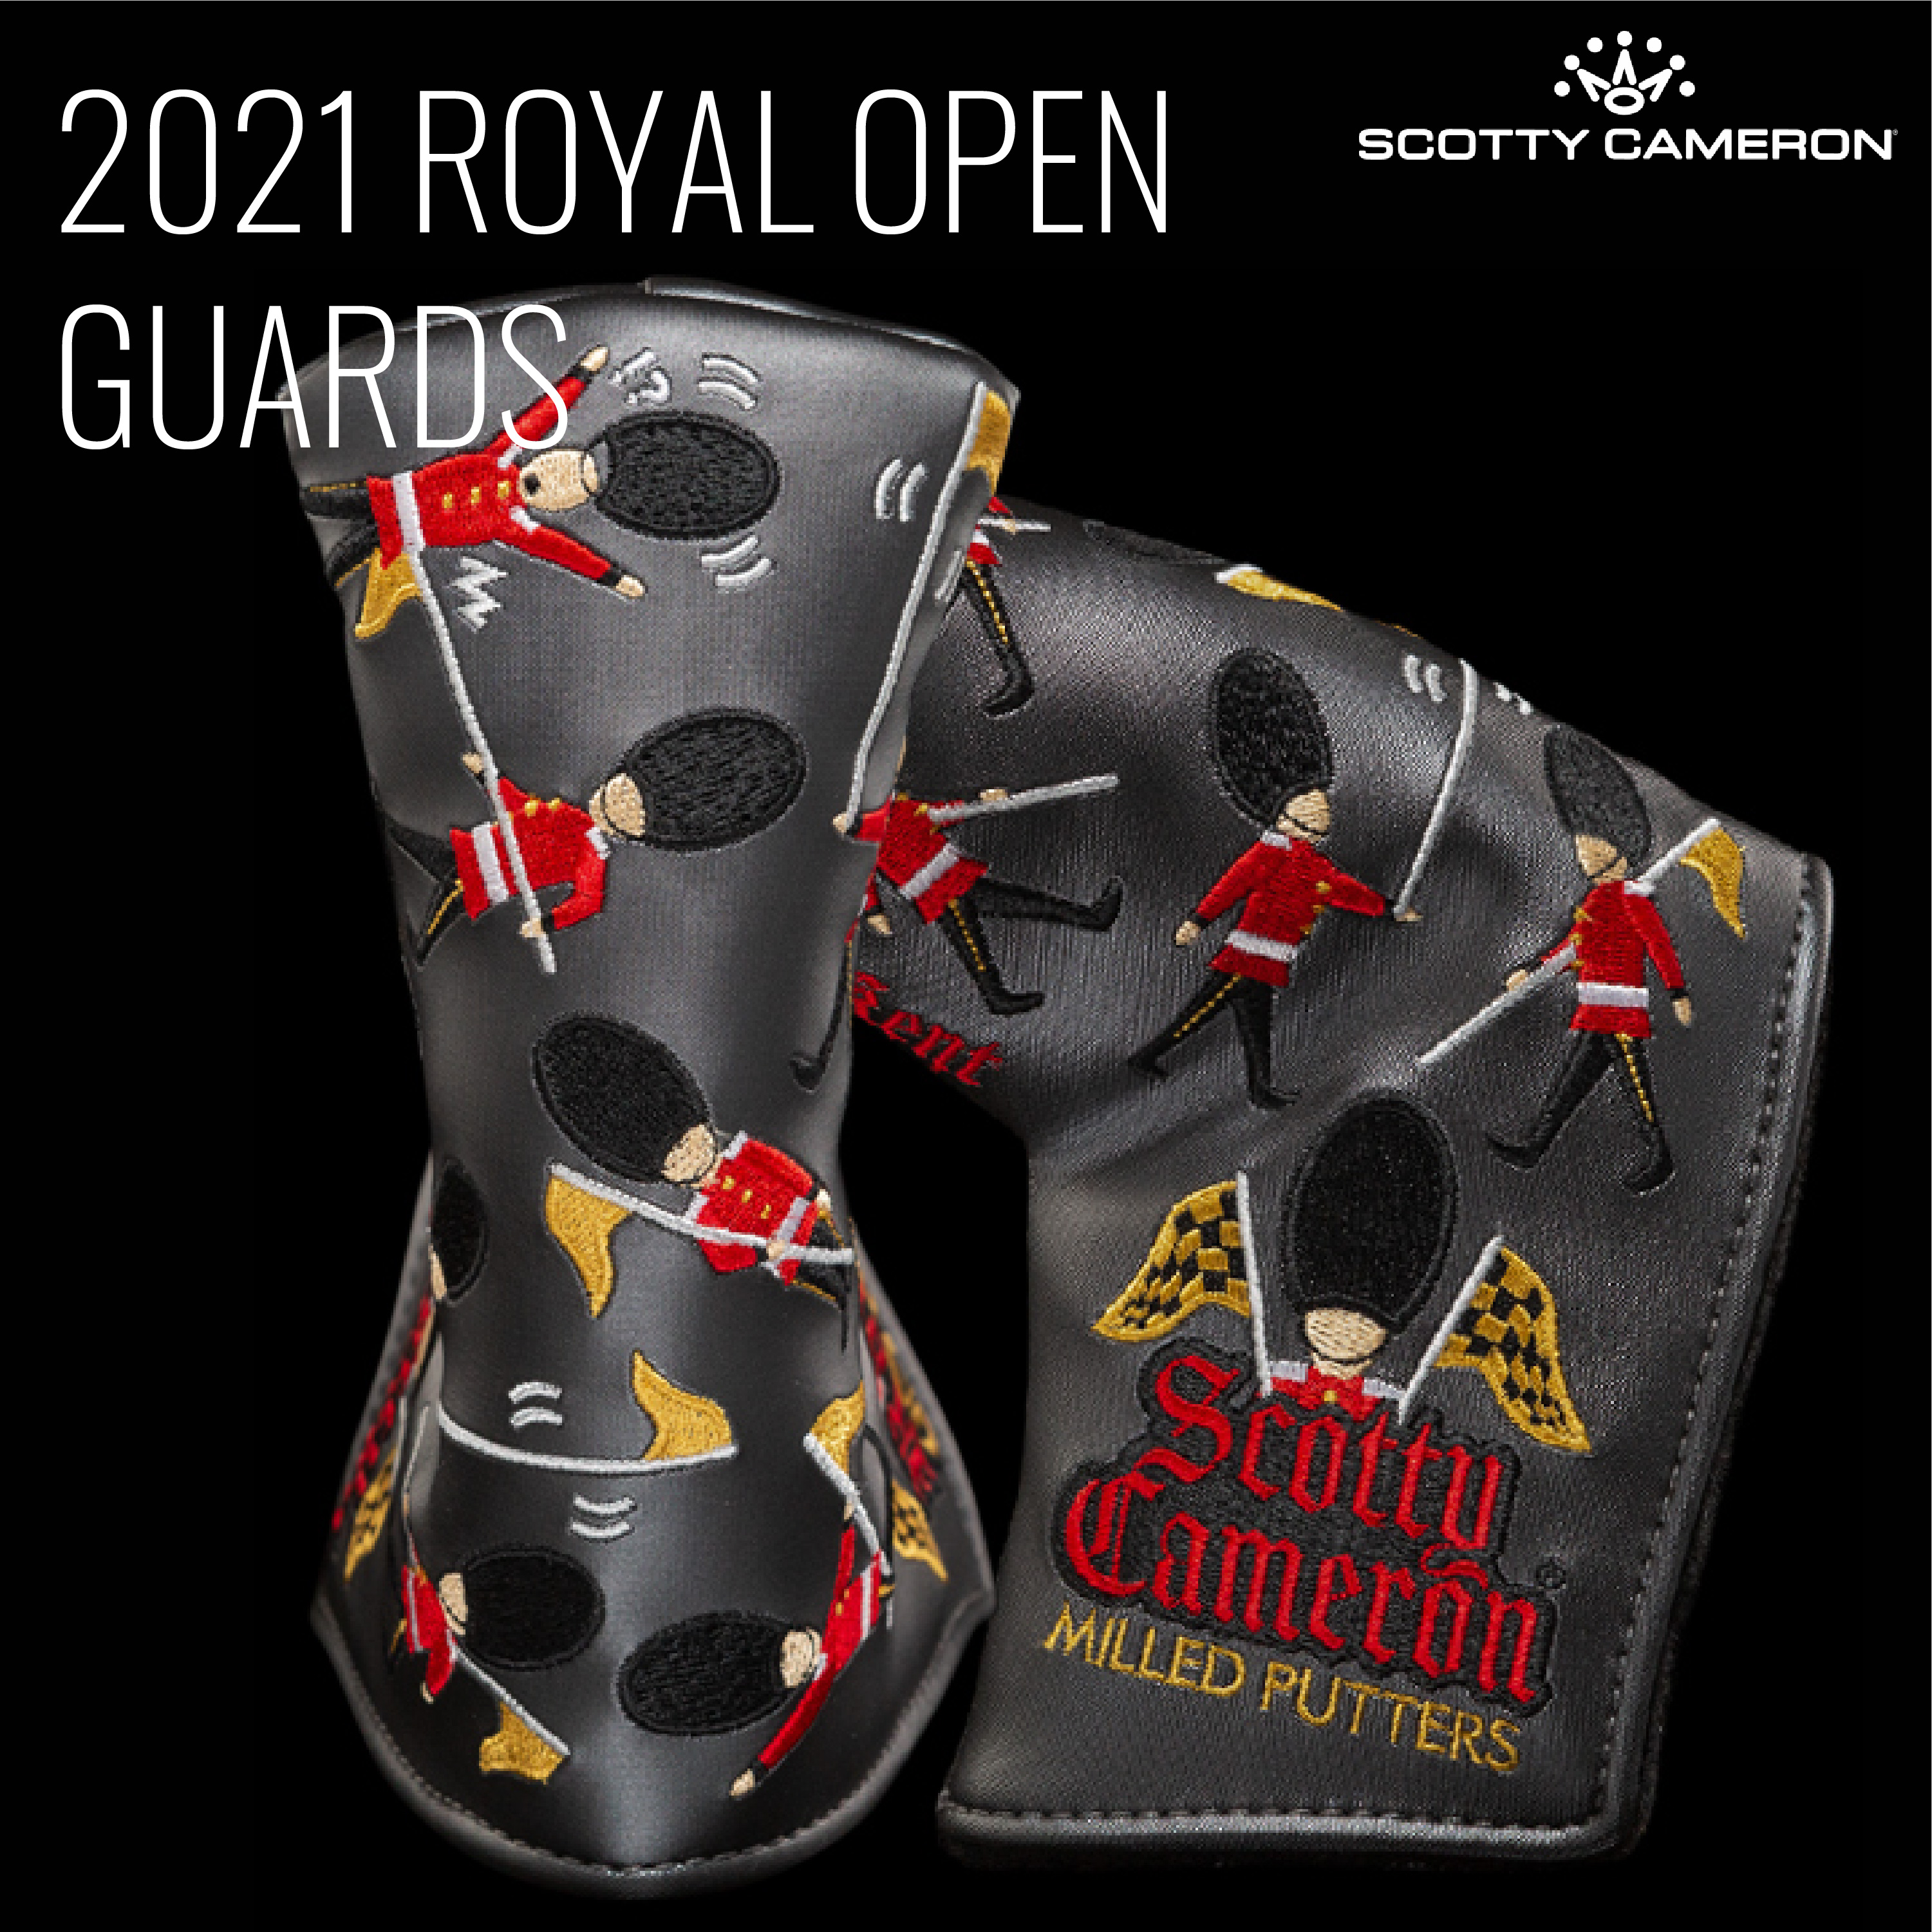 Scotty Cameron 2021 Royal Open Guards Limited